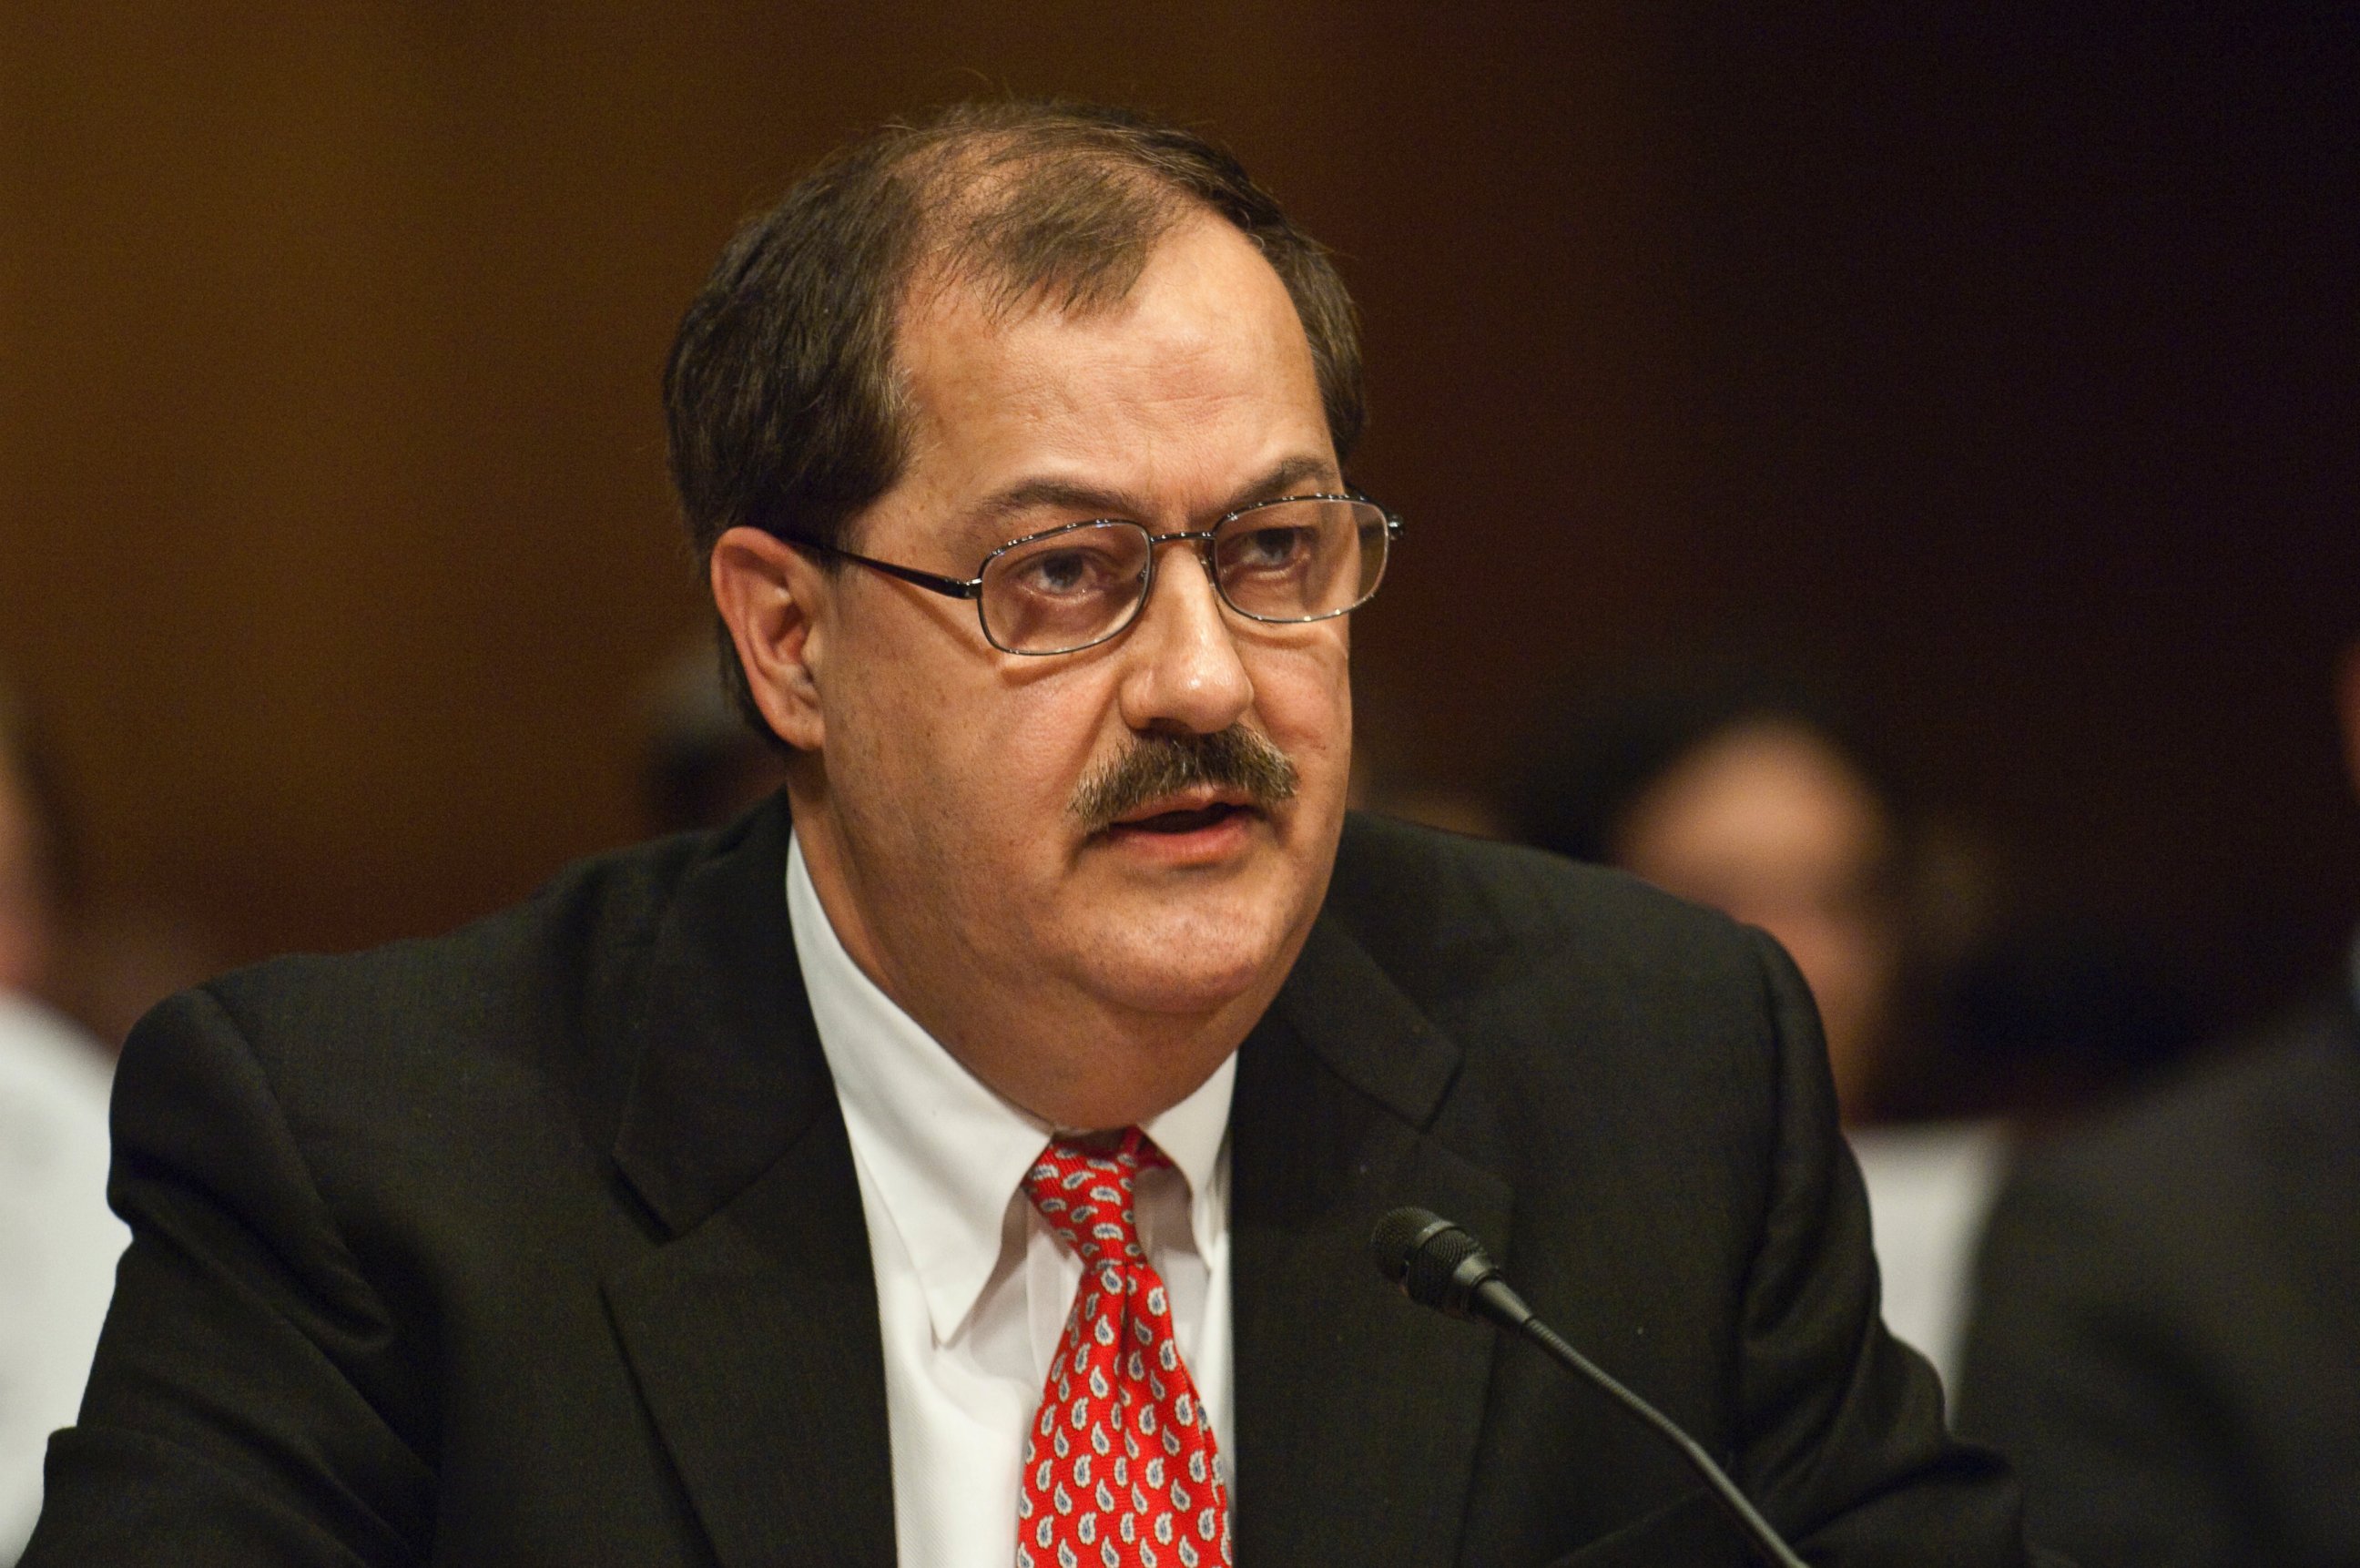 PHOTO: Don L. Blankenship, chairman and CEO of Massey Energy Co., appears before a Senate Appropriations Subcommittee on Labor, Health and Human Services, Education, and Related Agencies hearing on mine safety May 20, 2010 in Washington. 